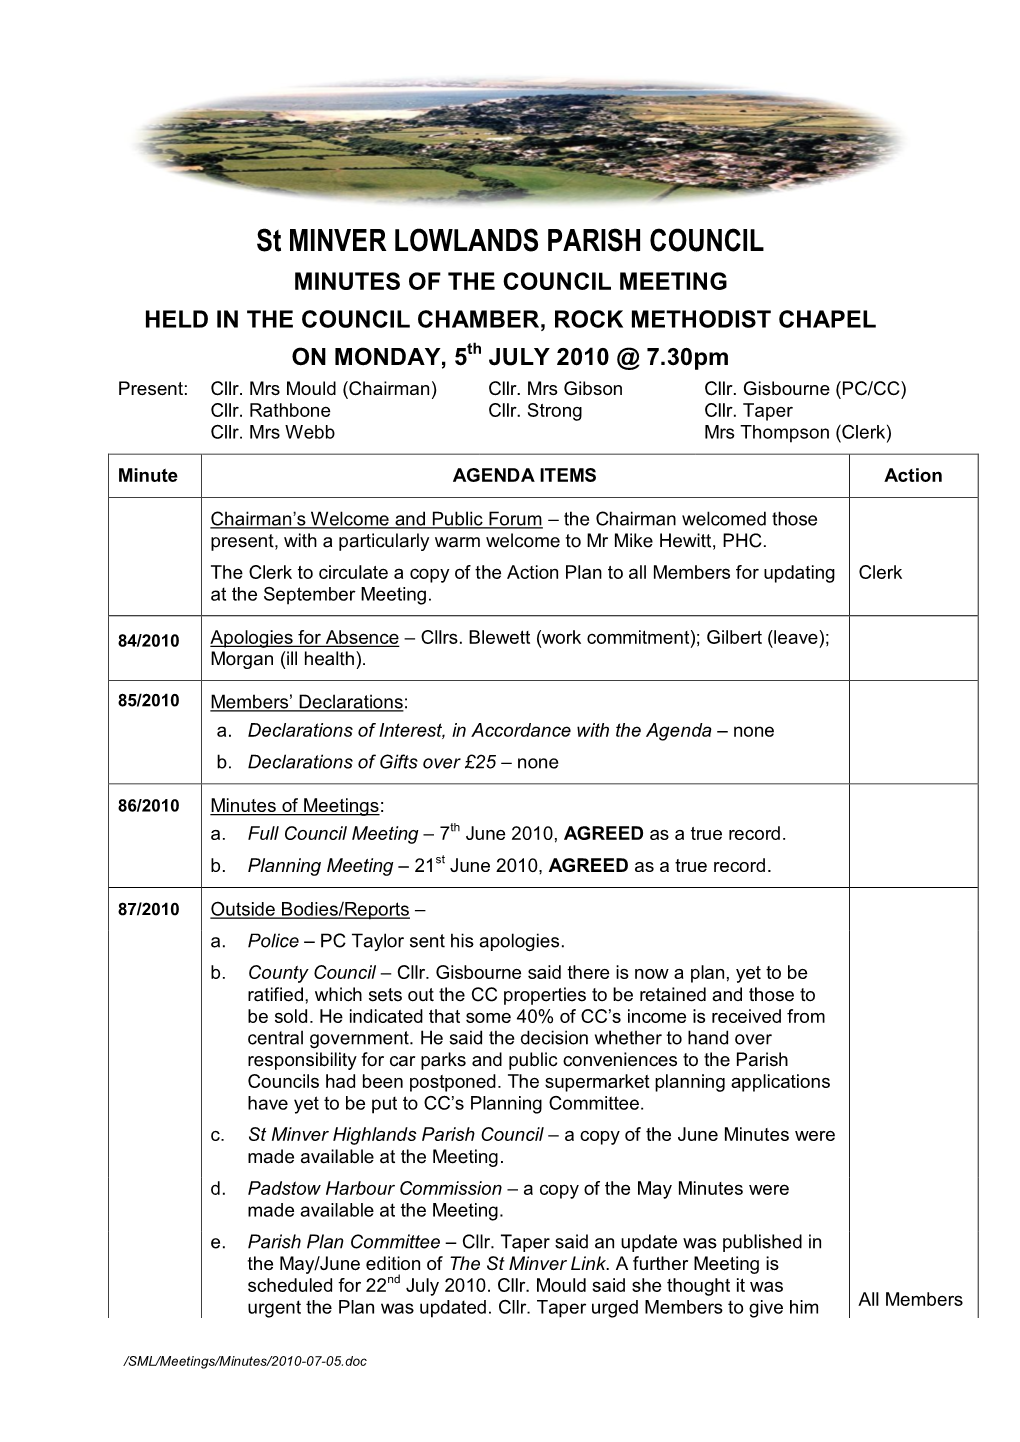 St MINVER LOWLANDS PARISH COUNCIL MINUTES of the COUNCIL MEETING HELD in the COUNCIL CHAMBER, ROCK METHODIST CHAPEL on MONDAY, 5Th JULY 2010 @ 7.30Pm Present: Cllr